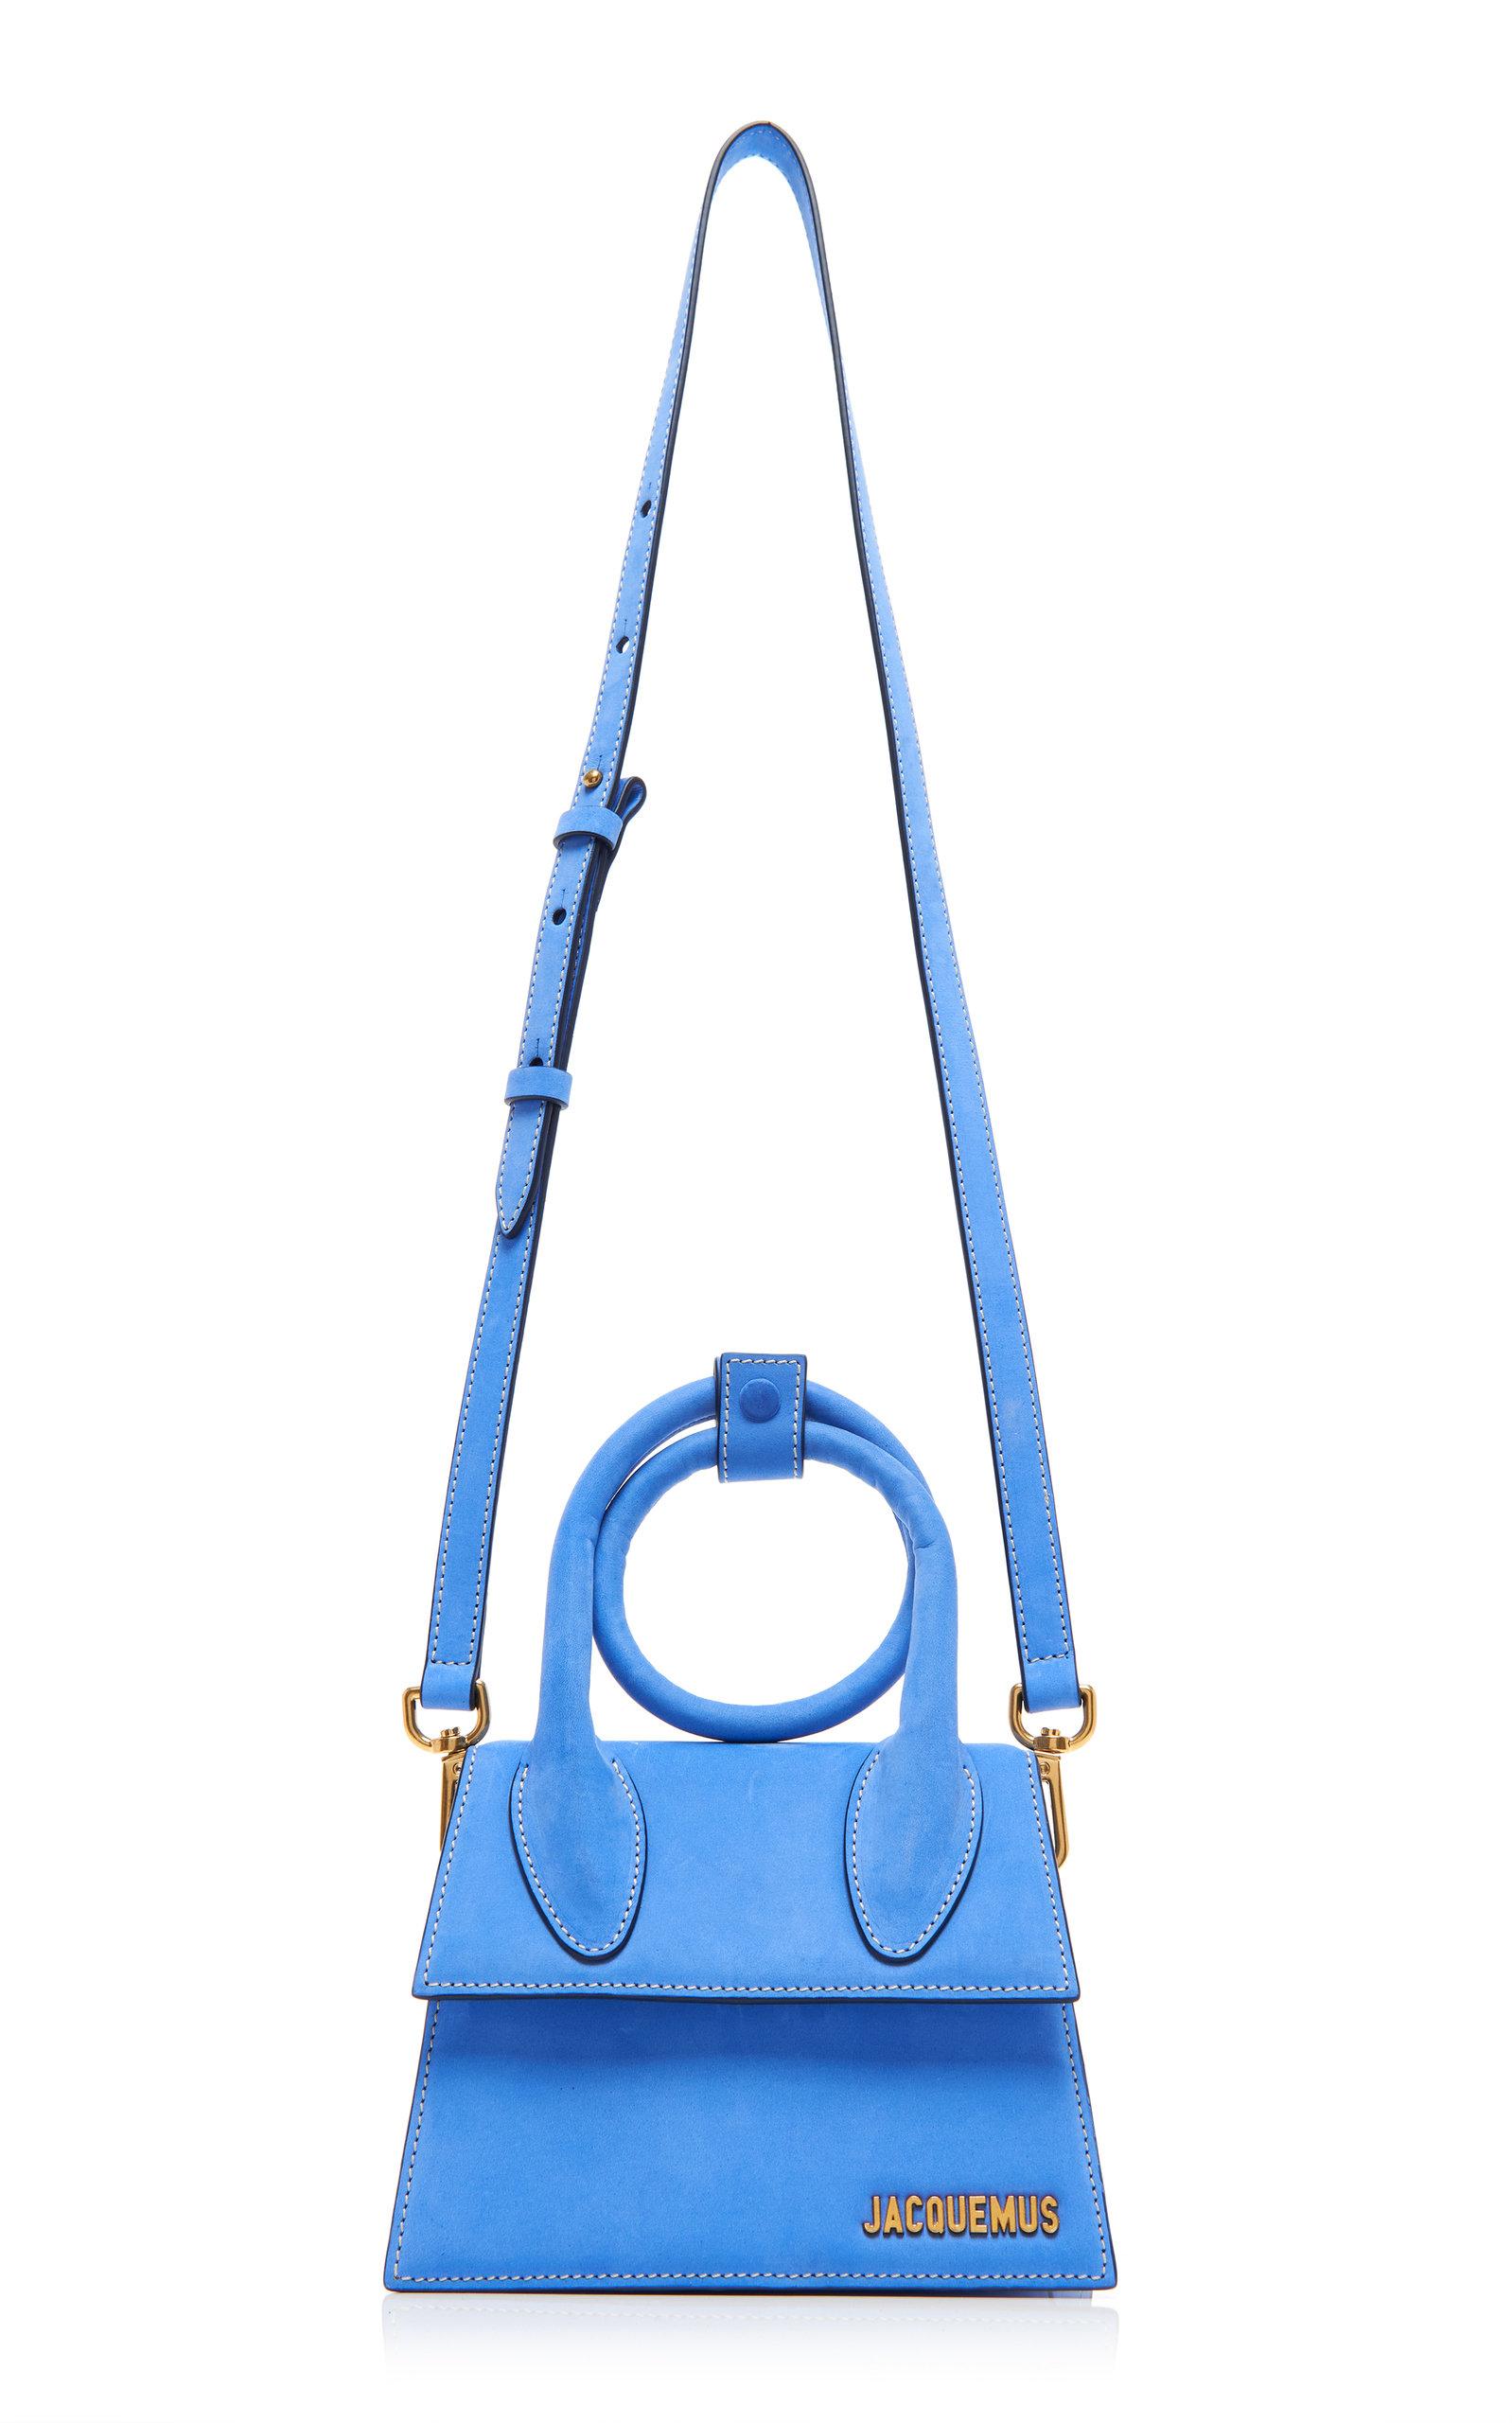 Jacquemus Le Chiquito Noeud Leather Bag in Blue - Lyst